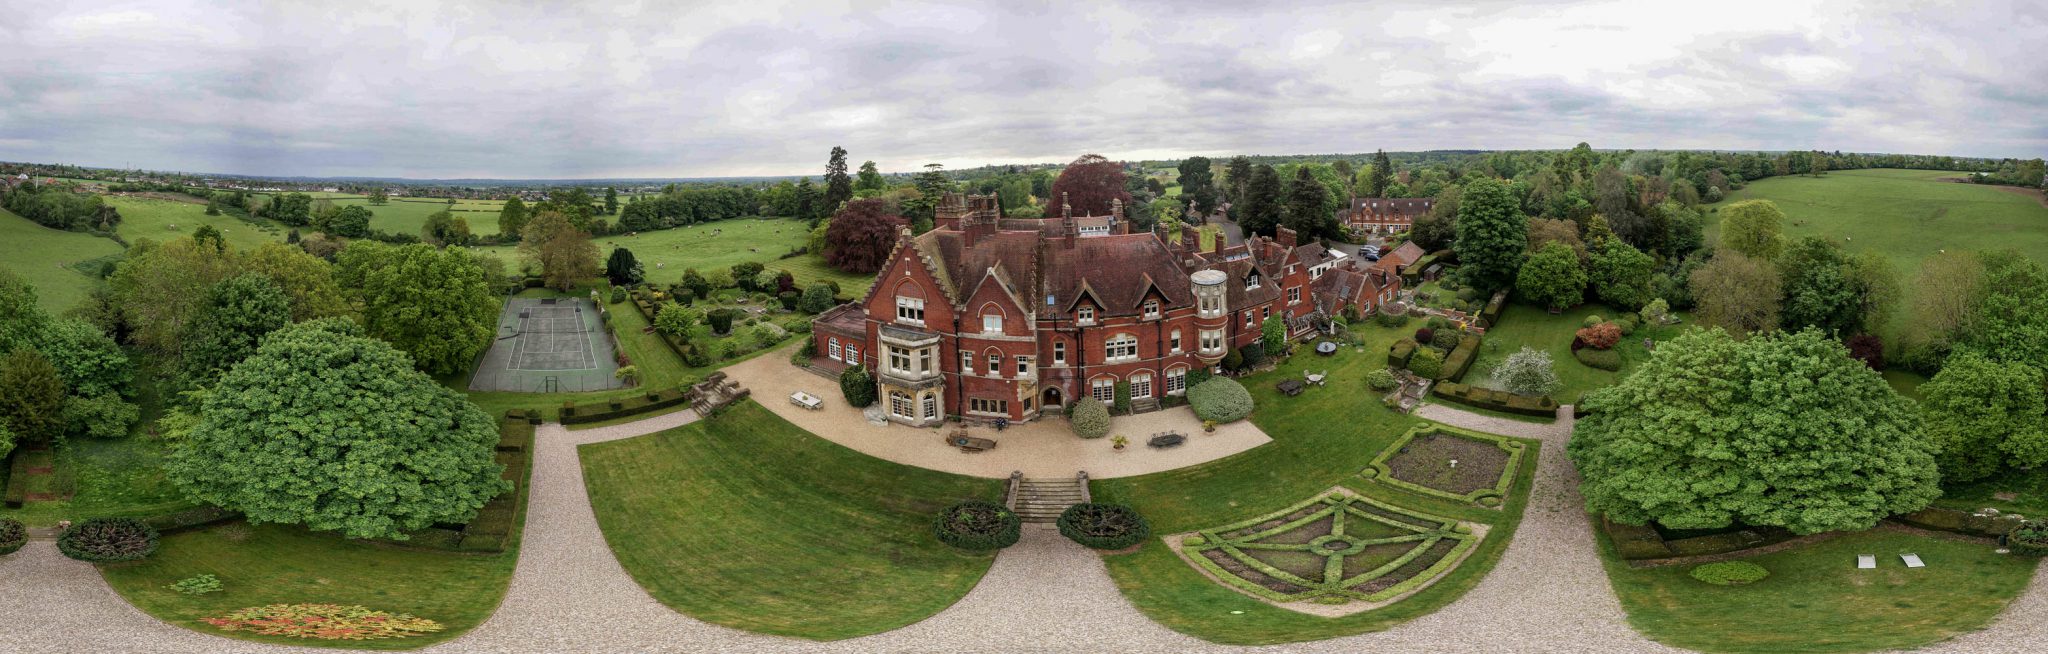 Panoramic photograph of a large English country house, taken from a drone during a 3D environment scan capture.